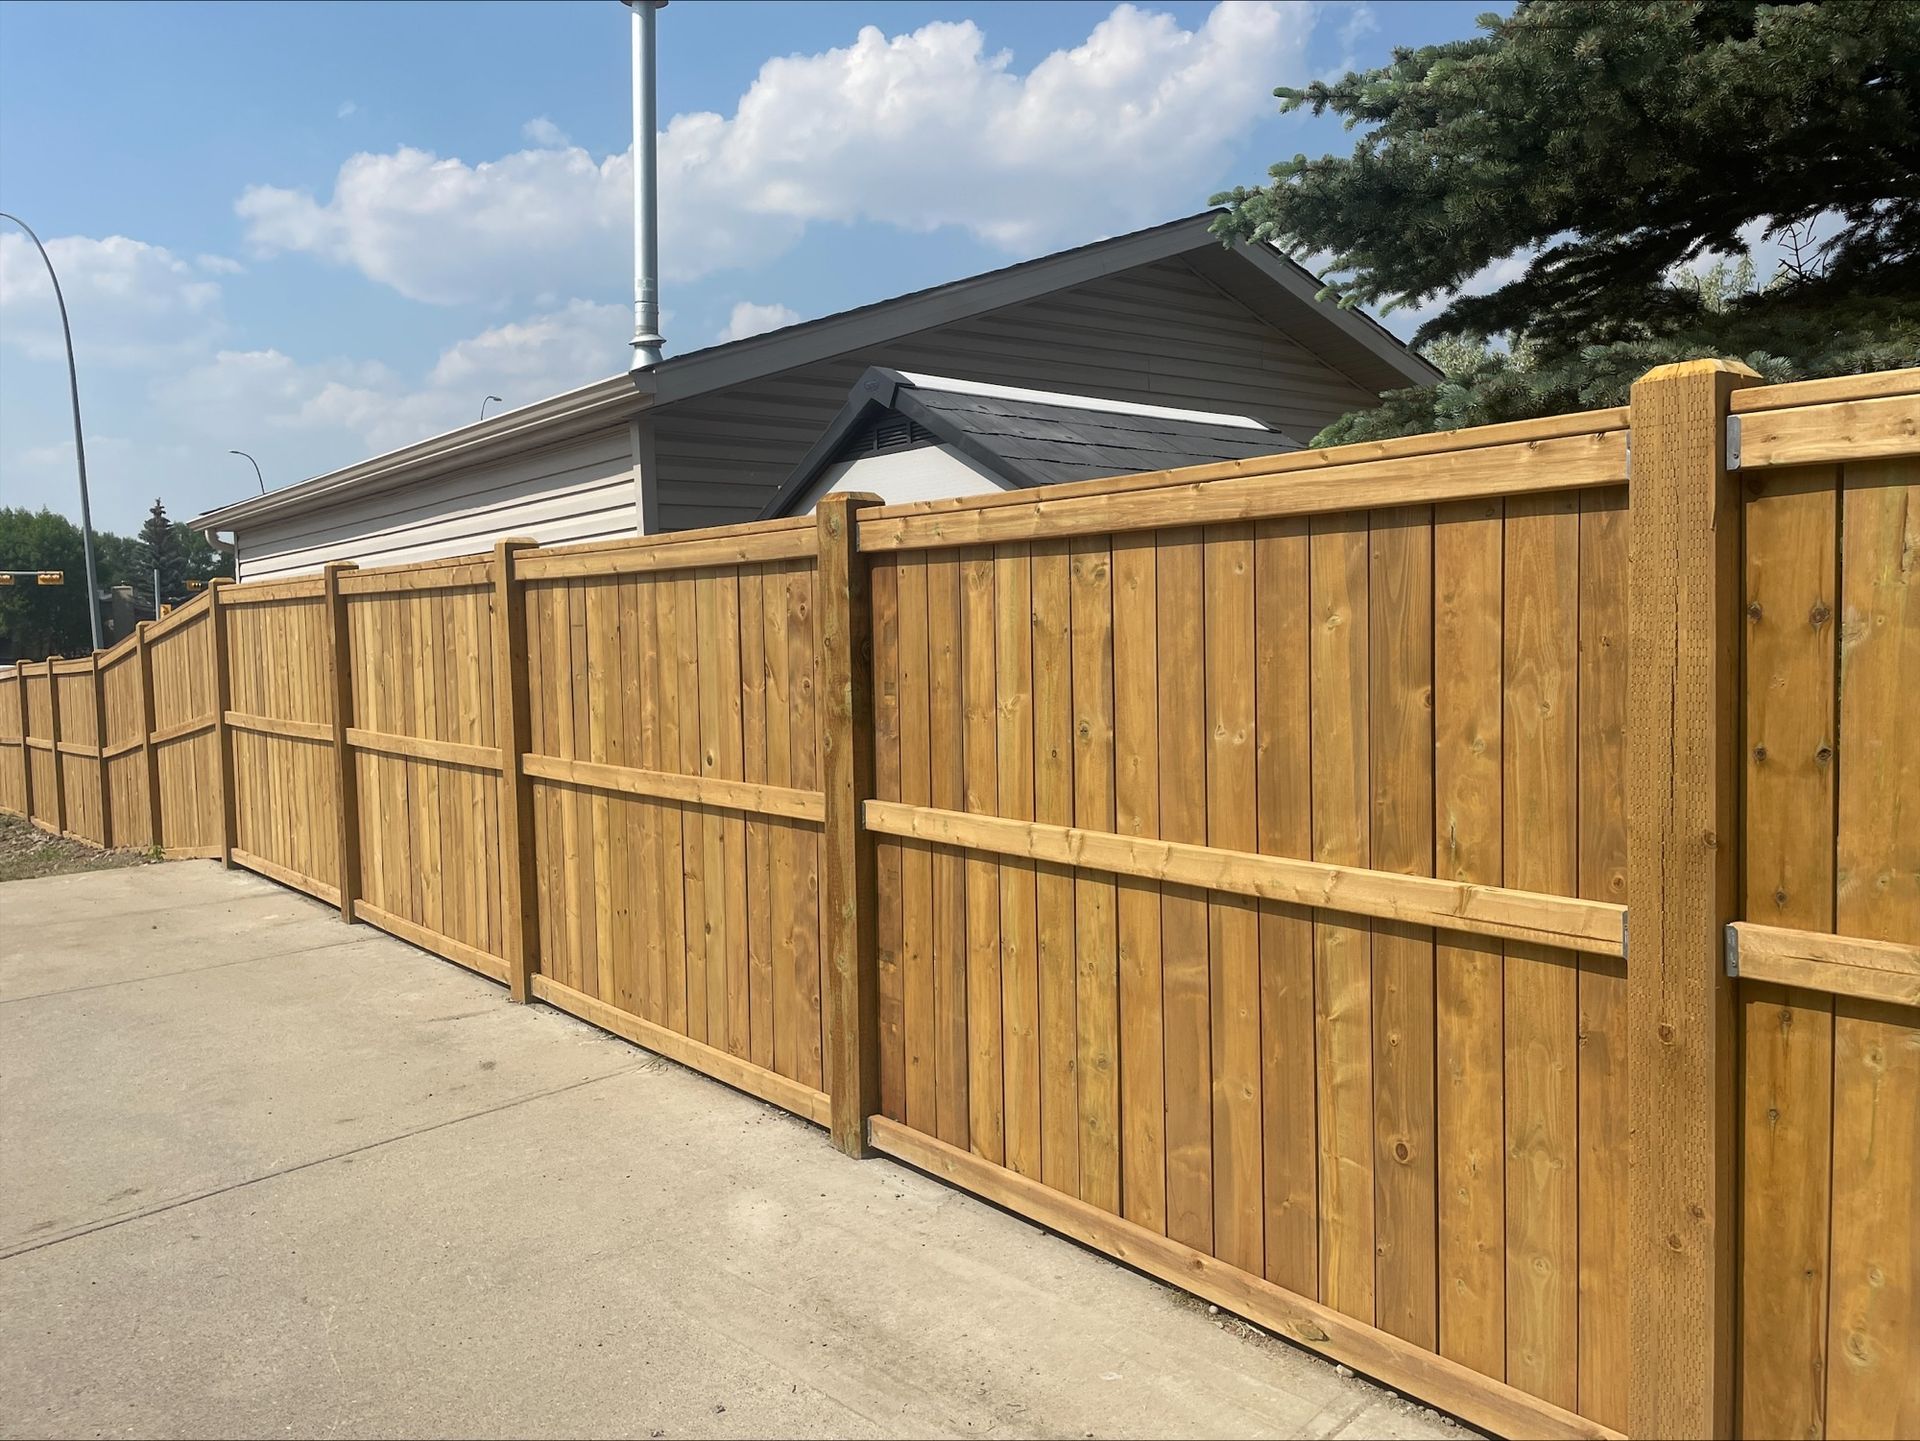 Wooden fence installation from Toronto Fence Pros